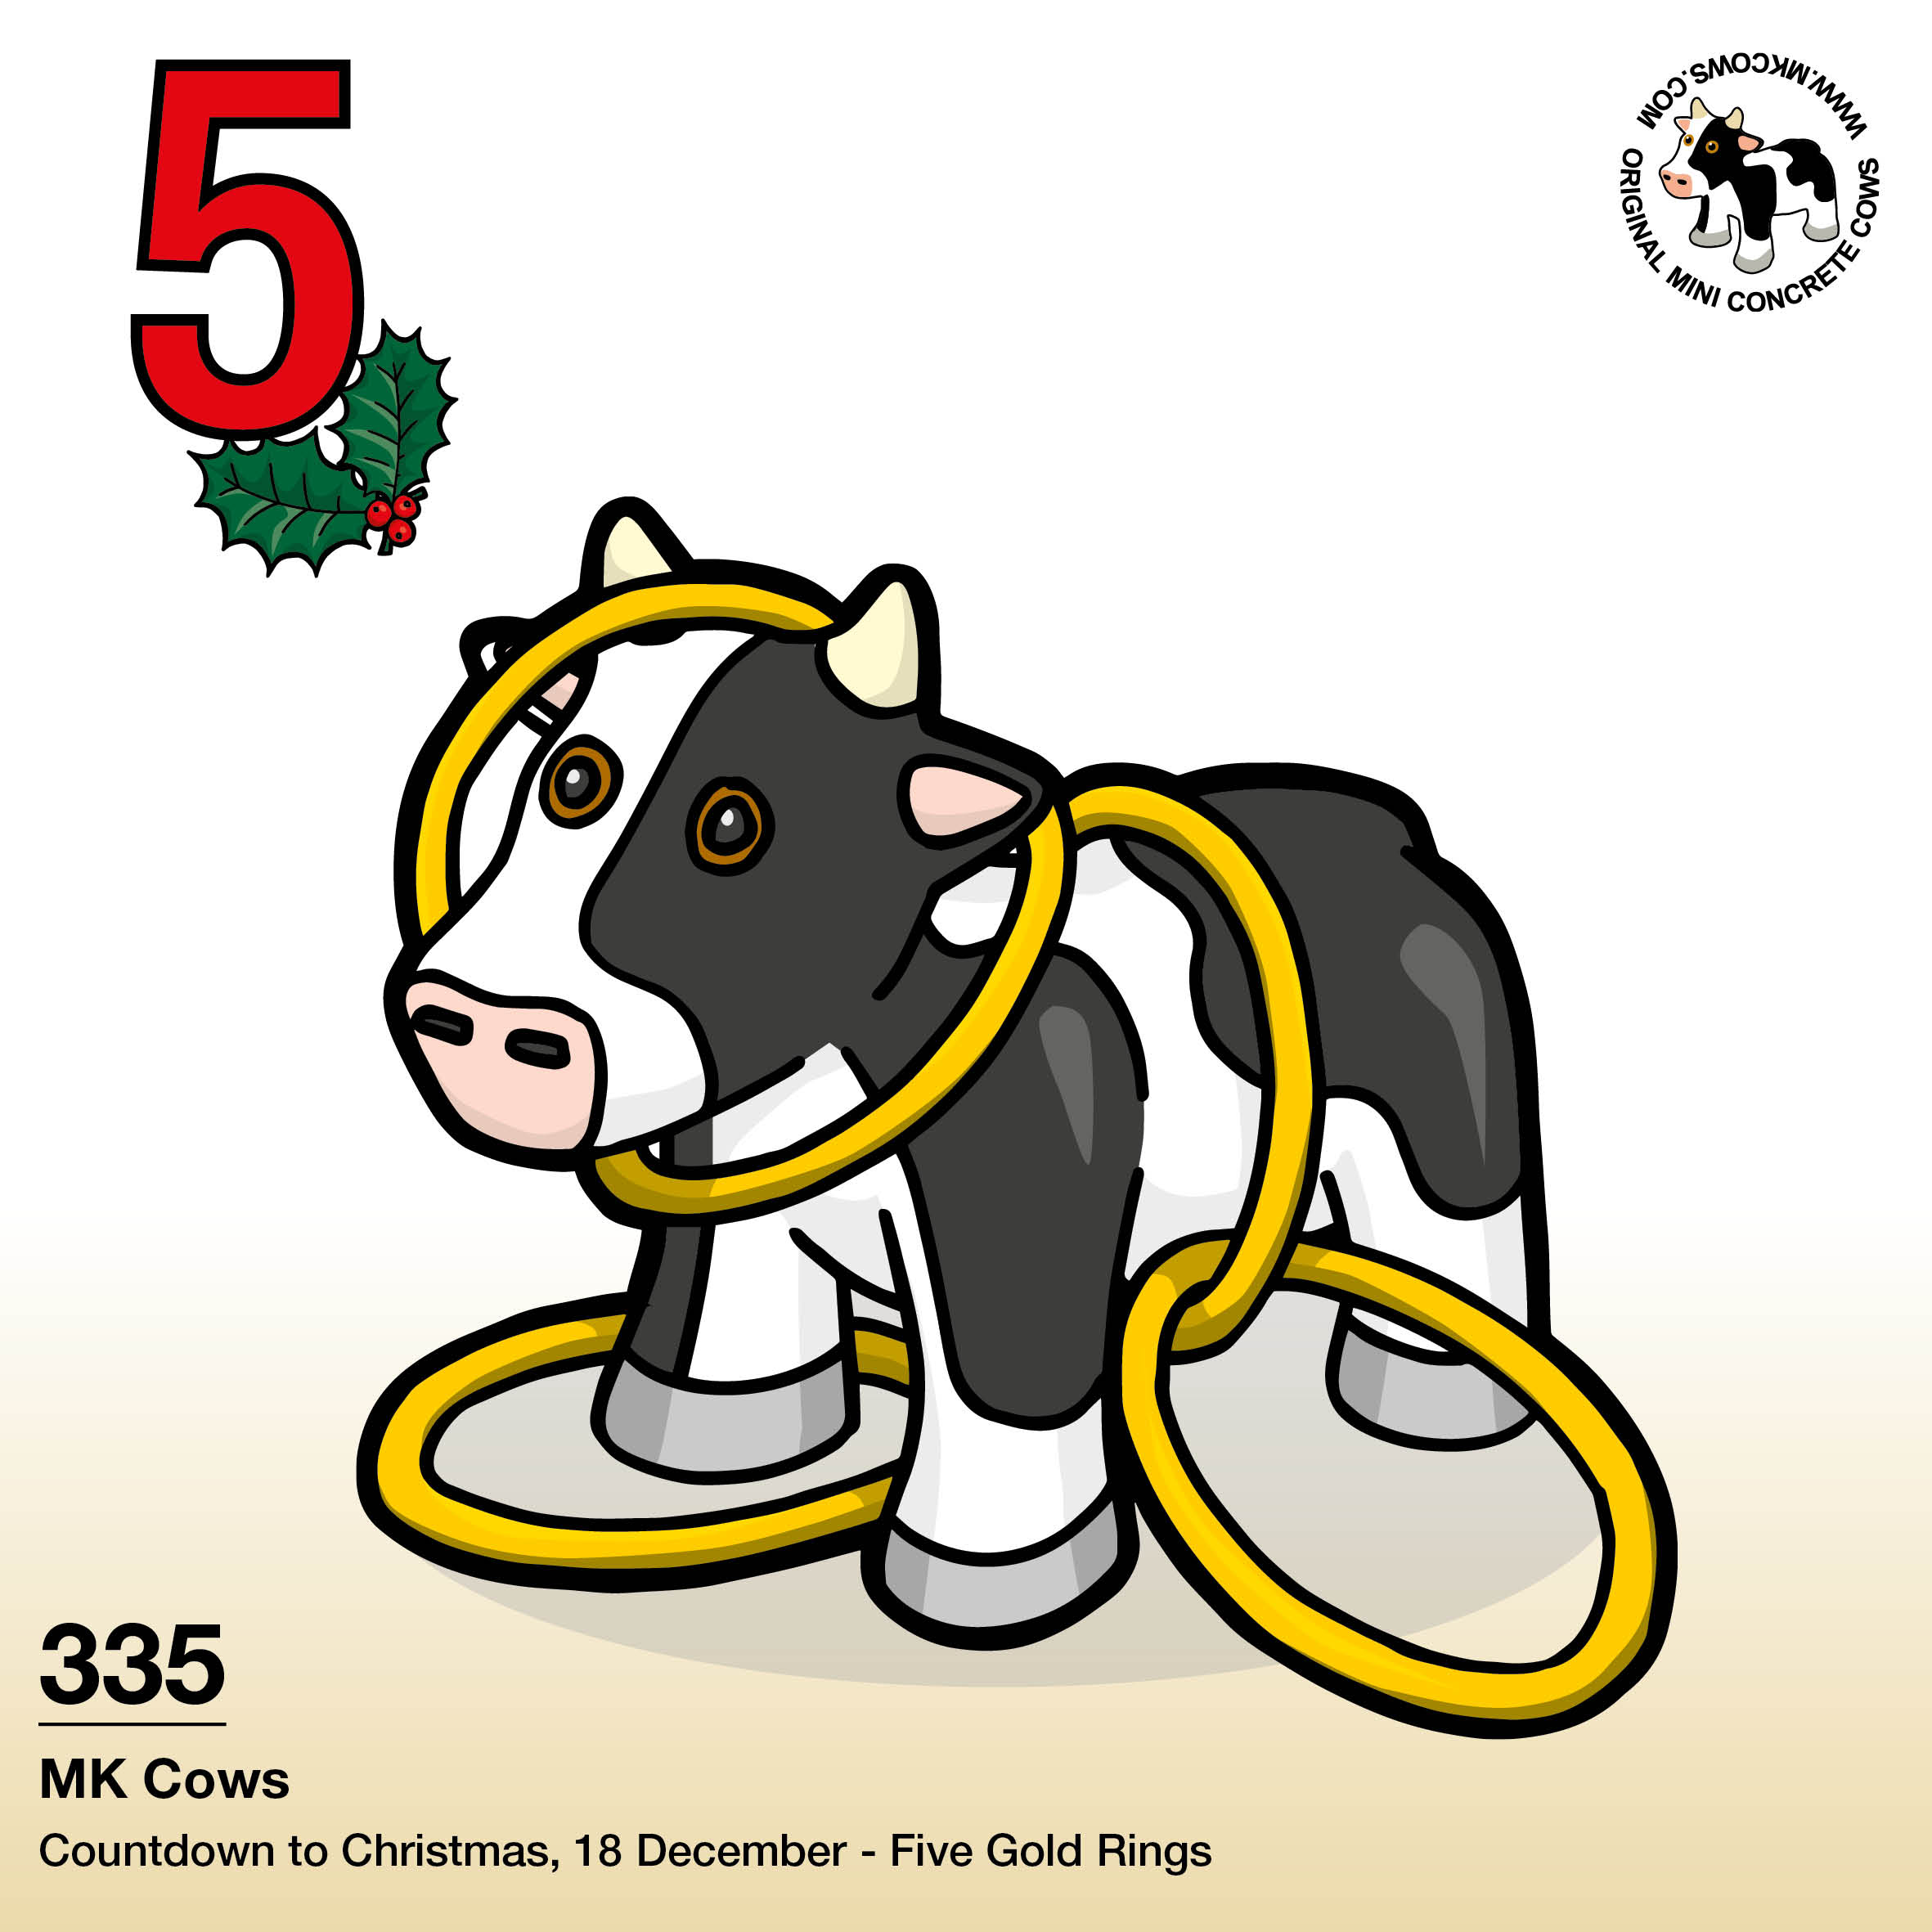 On the fifth day of Christmas my moo cow gave to me... five gold rings (hanging from a Mini Concrete Cow!)